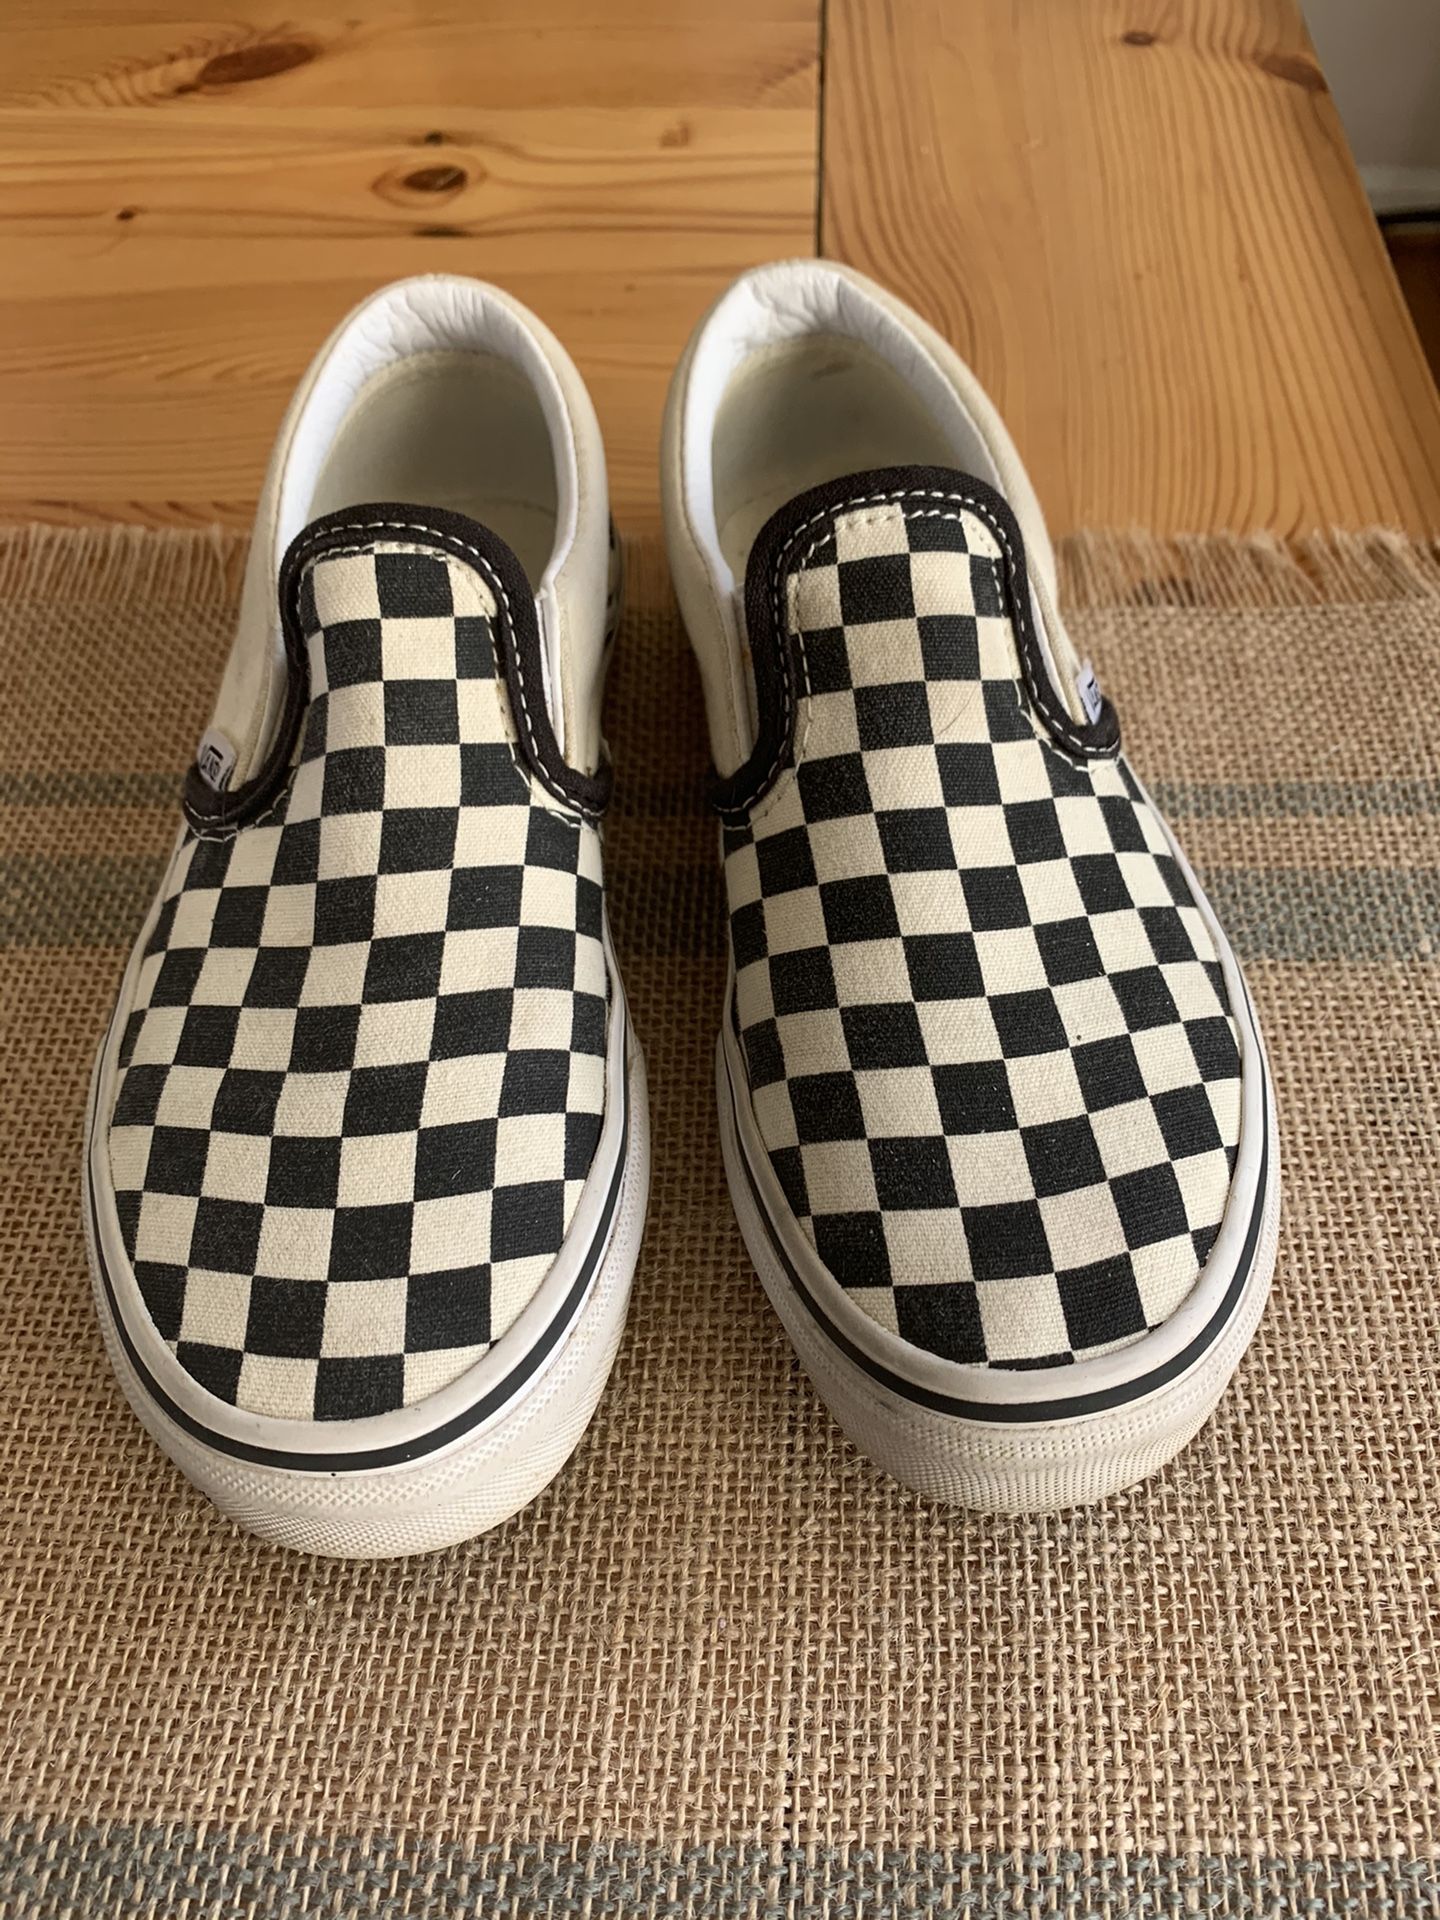 Kids Vans checkered shoes size 1.5